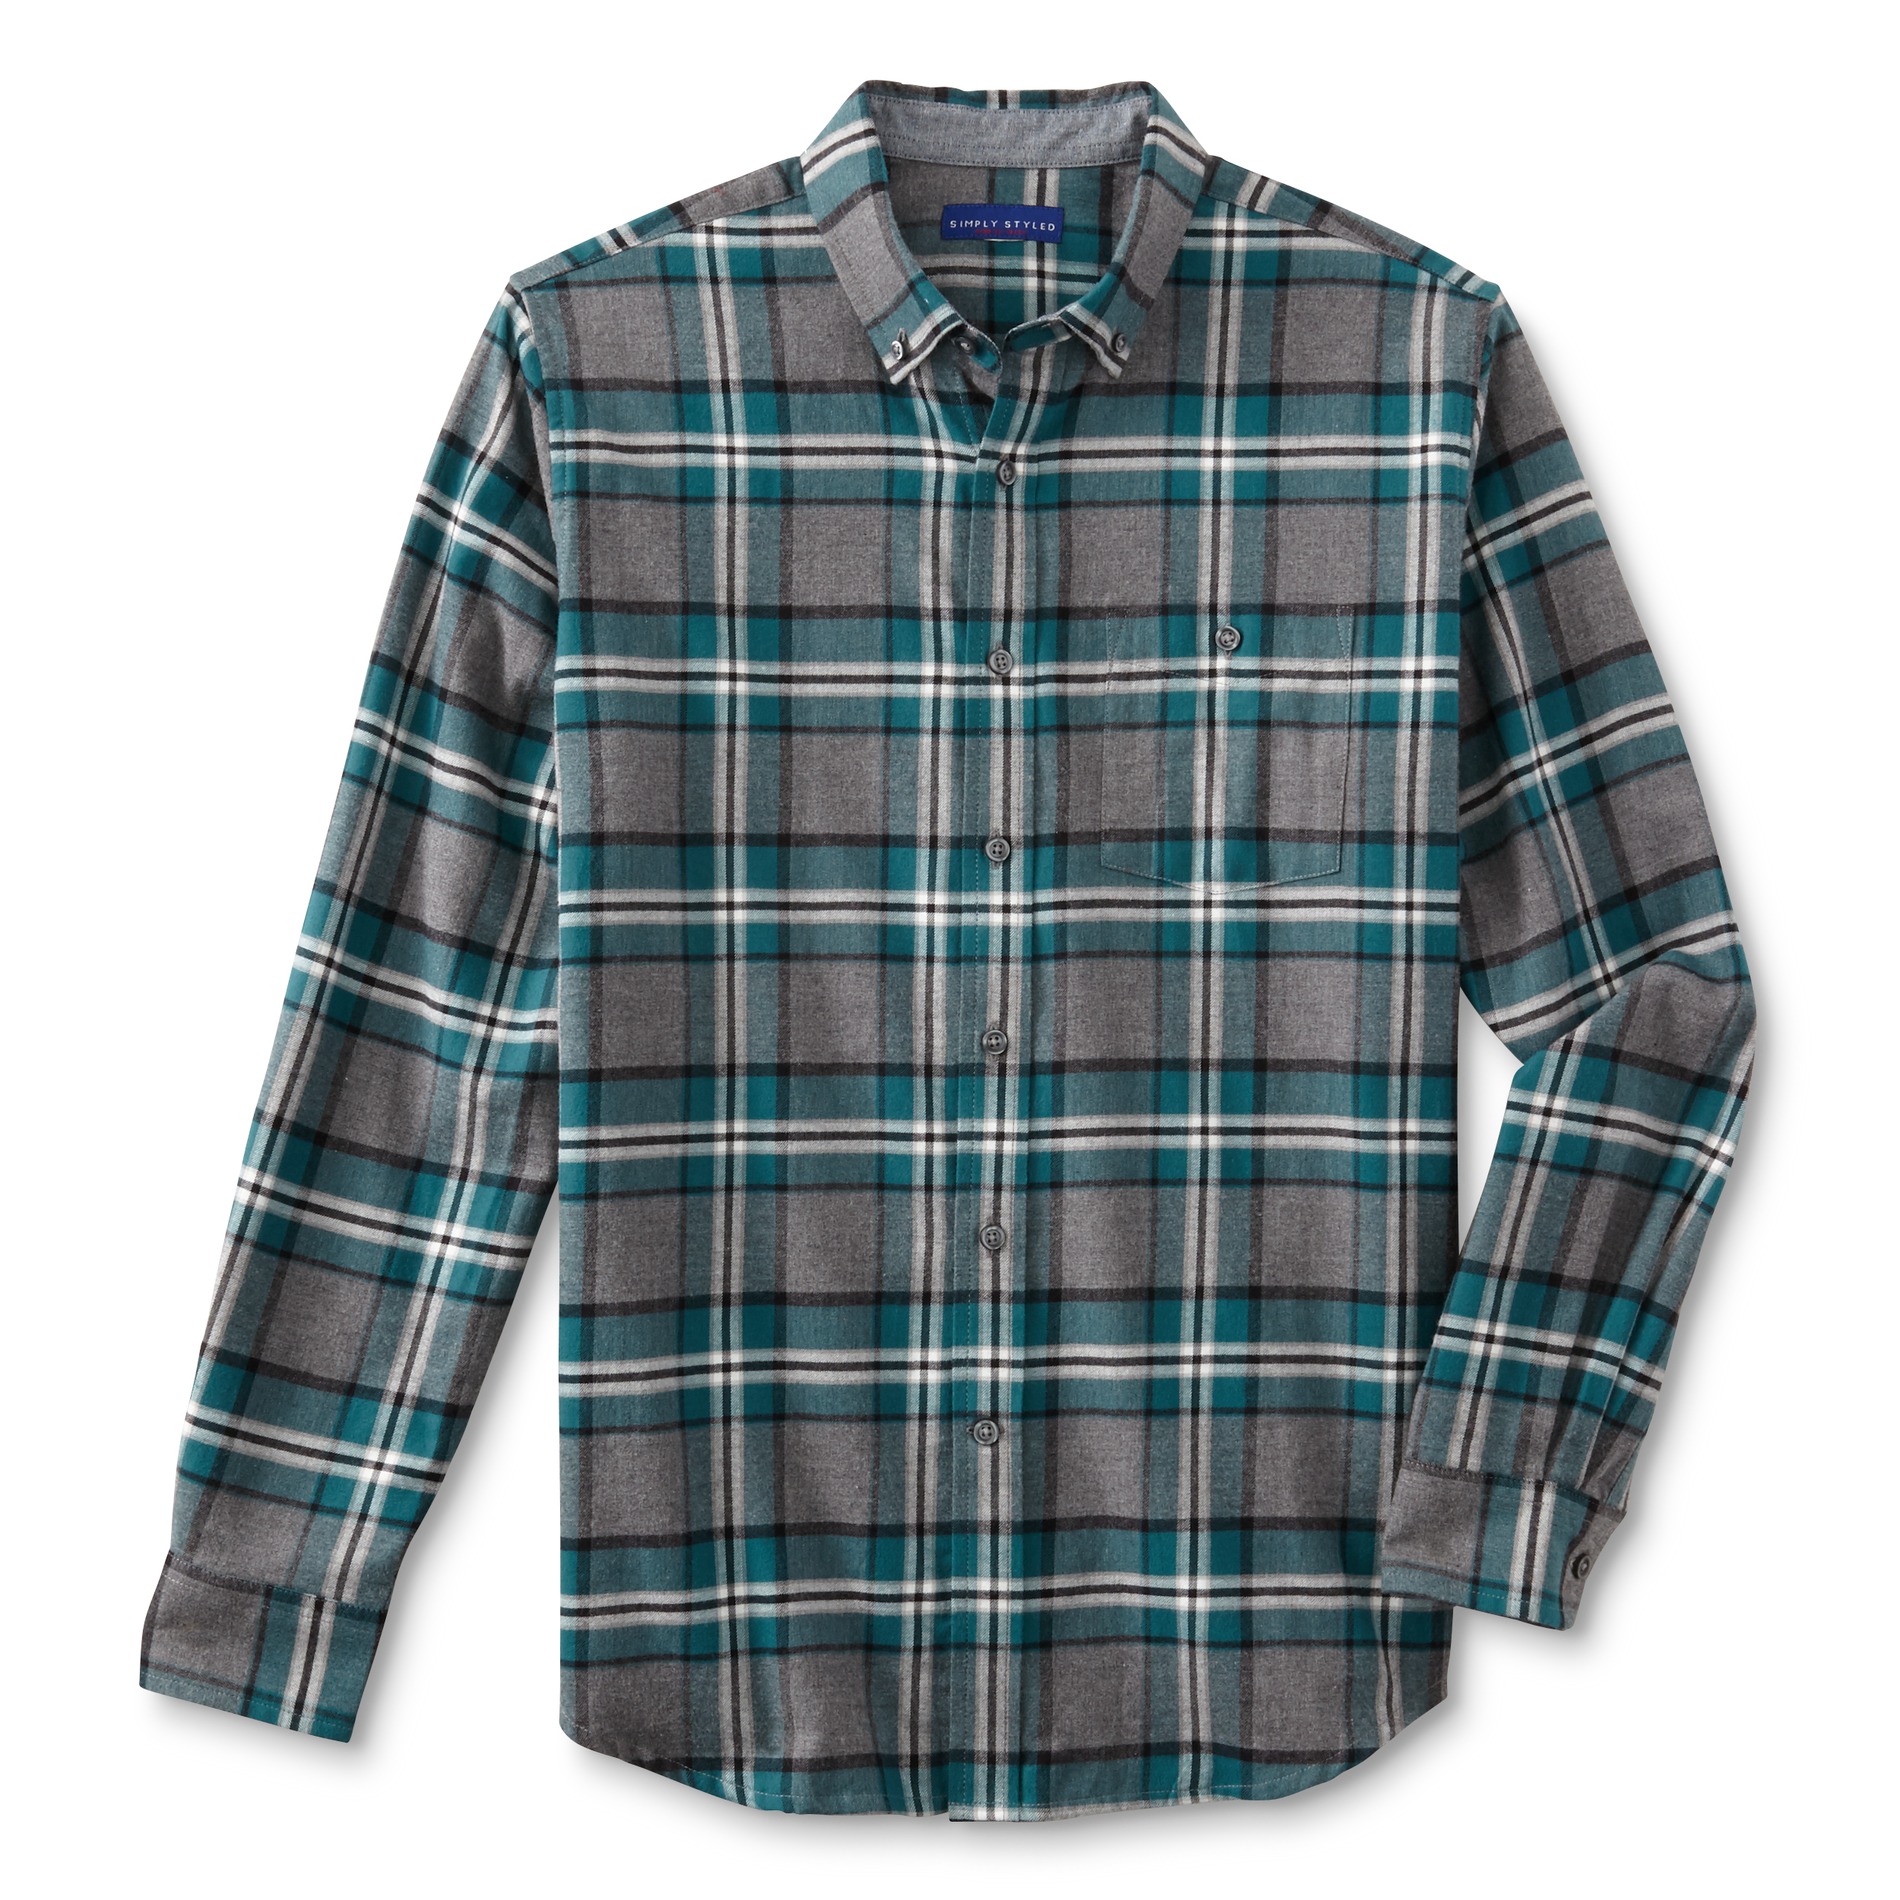 Simply Styled Men's Flannel Shirt - Plaid